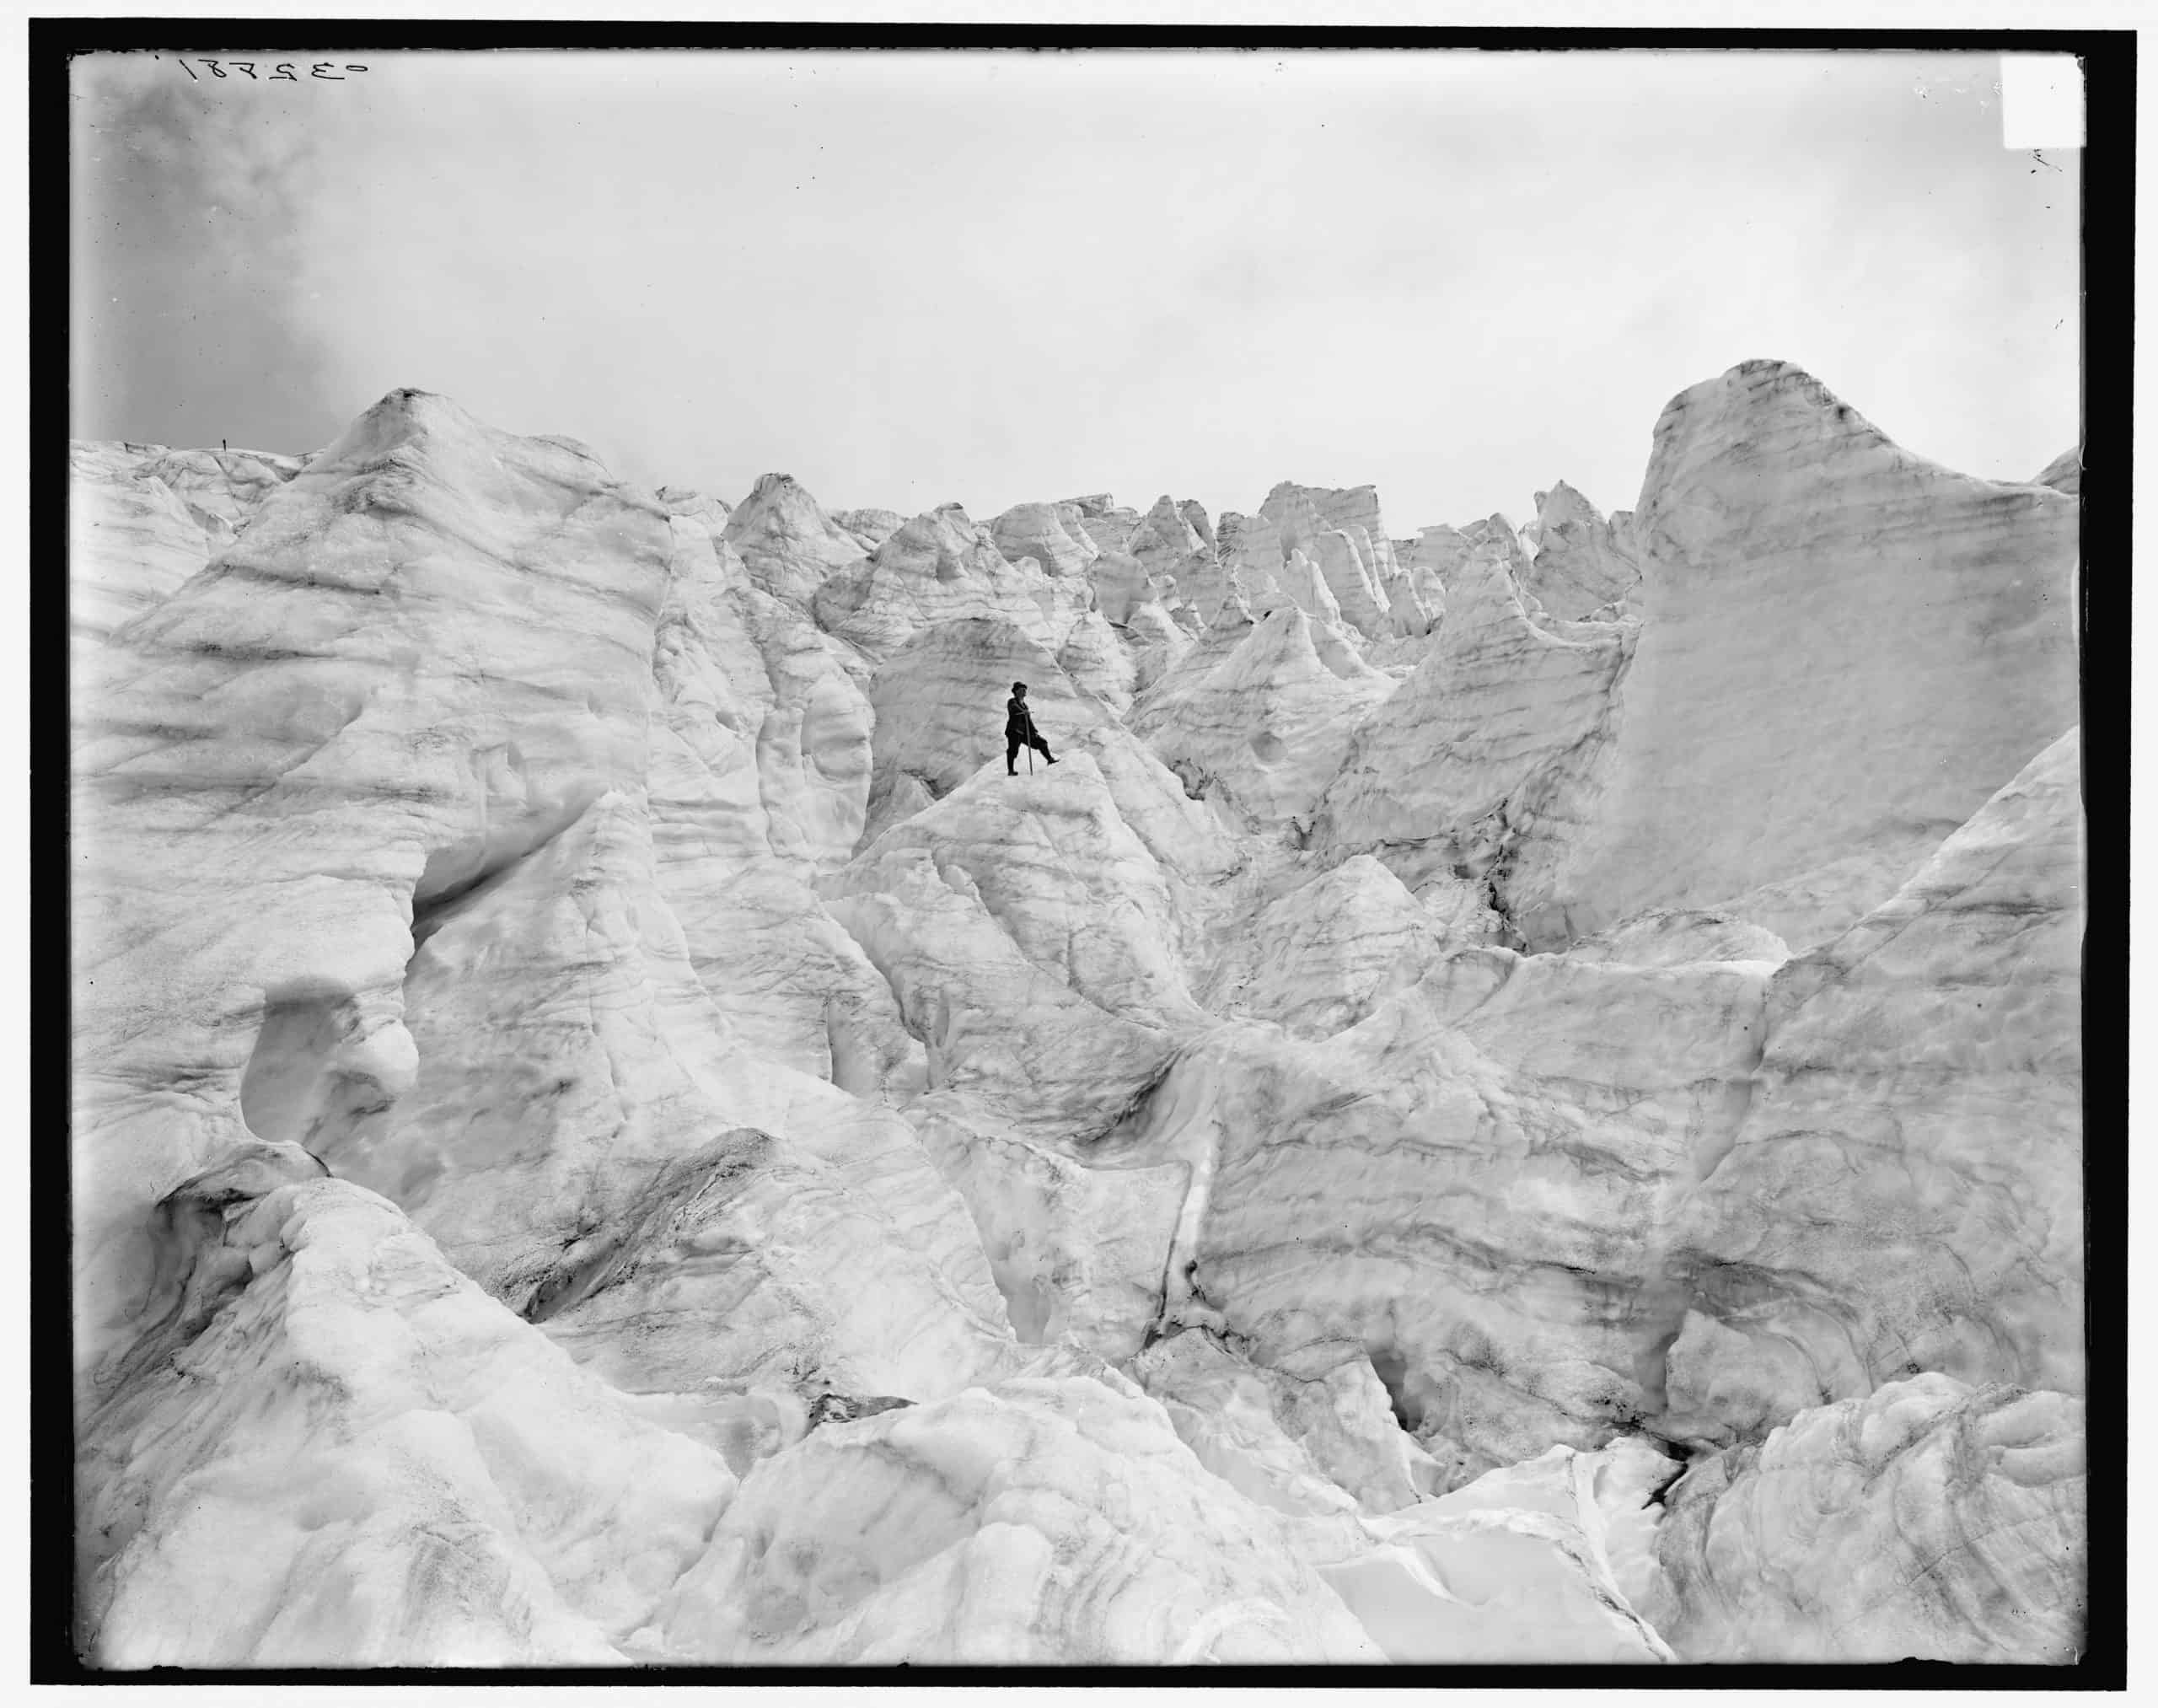 Illecillewaet Glacier from Seracs, Selkirk Mts., British Columbia, Detroit Publishing Co., between 1900 and 1910